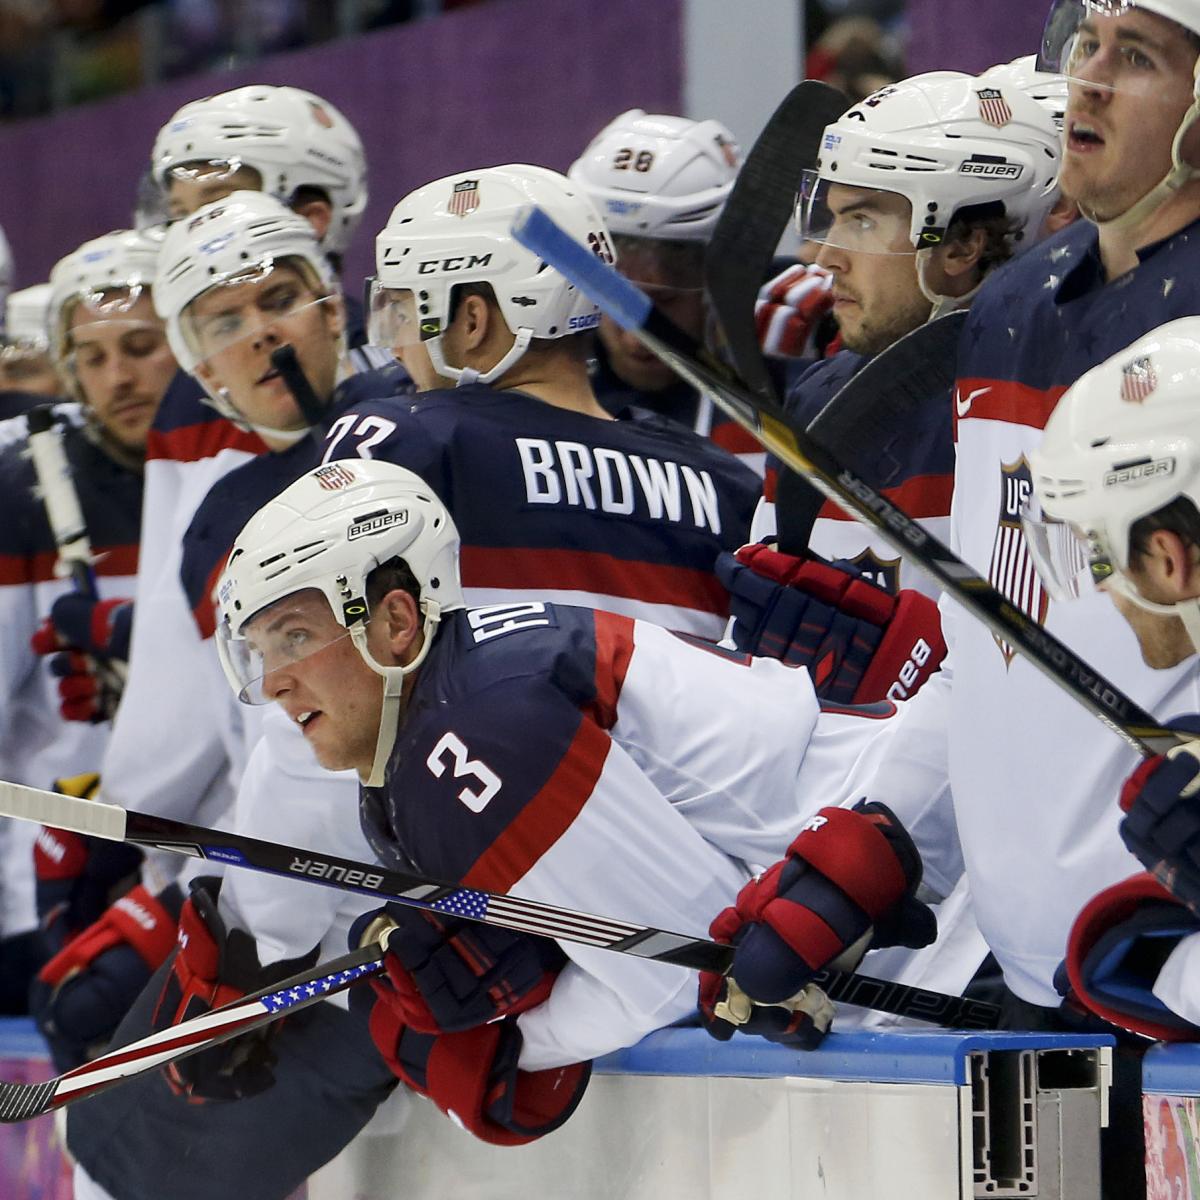 USA vs. Finland BronzeMedal Game Key Storylines Entering Matchup in